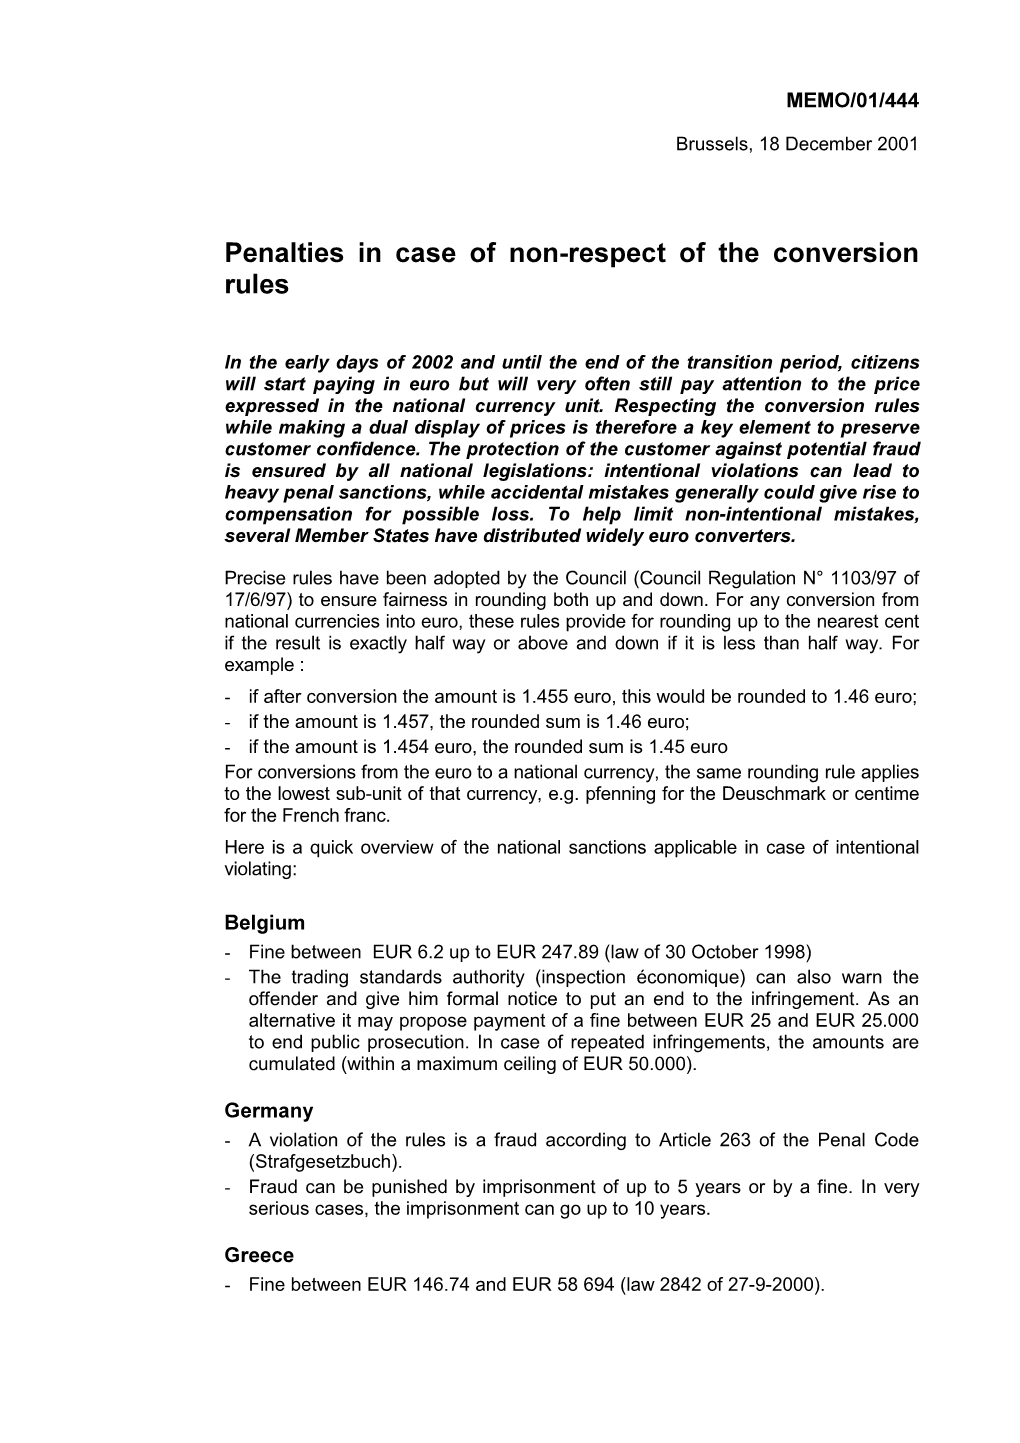 Penalties in Case of Non Respect of the Conversion Rules